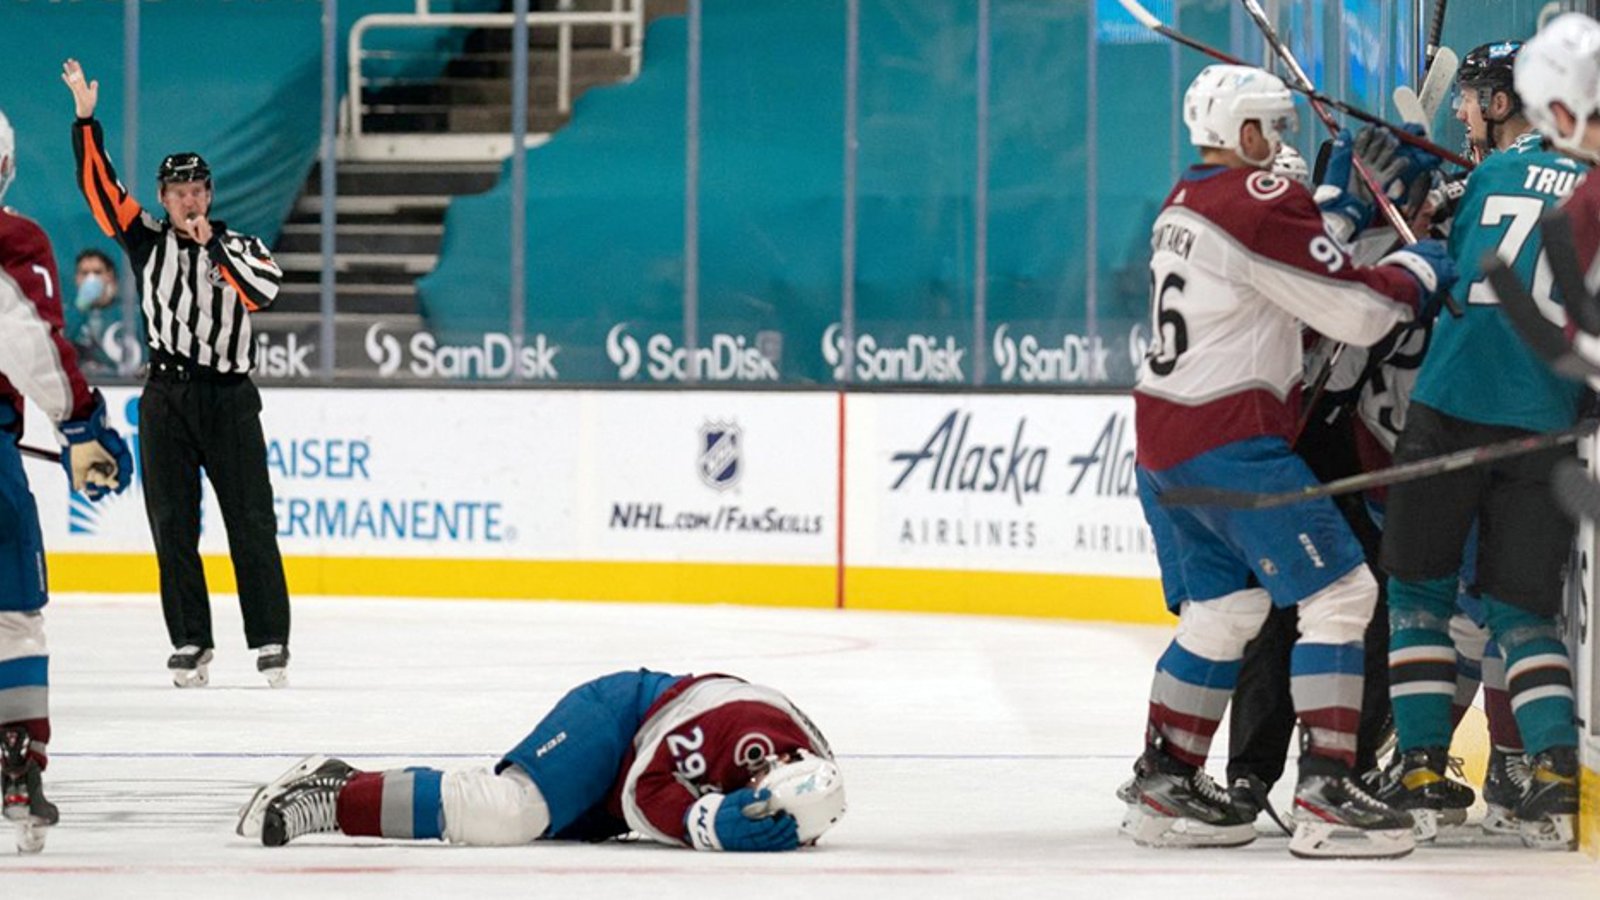 Sharks' Blichfeld summoned by NHL Player Safety after knocking Nathan MacKinnon out of last night's game